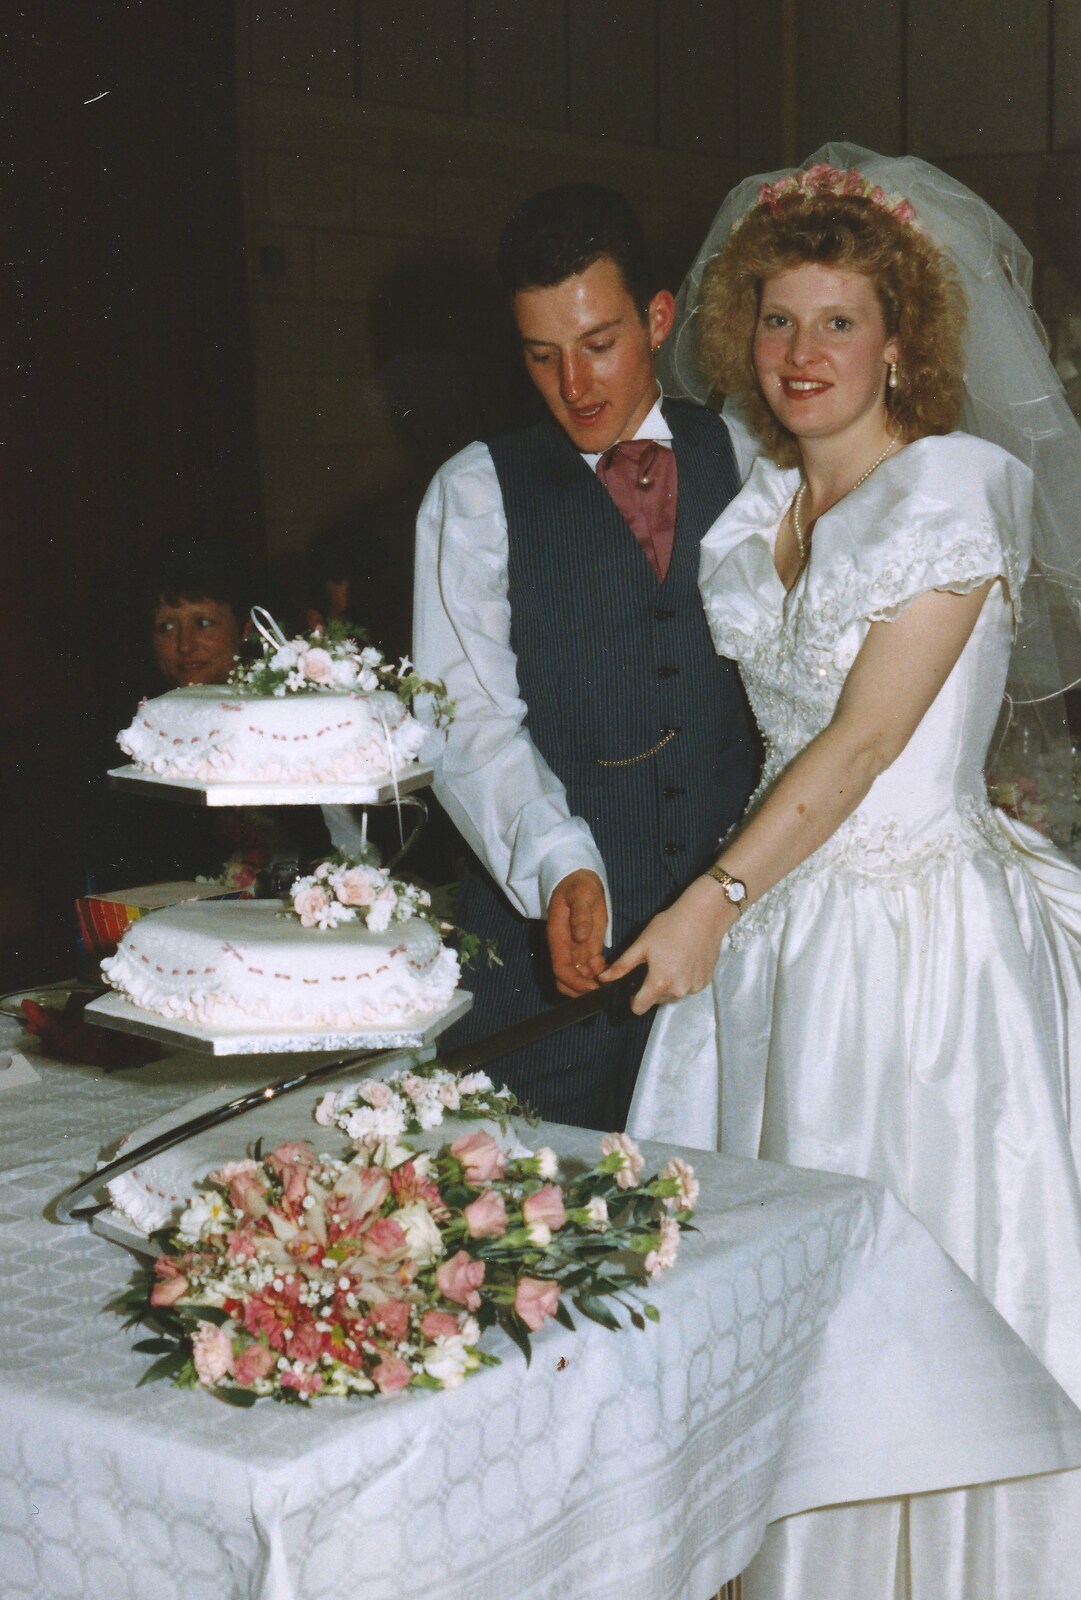 Andy and Debbie cut the cake from Debbie's Wedding, Suffolk - 12th June 1999